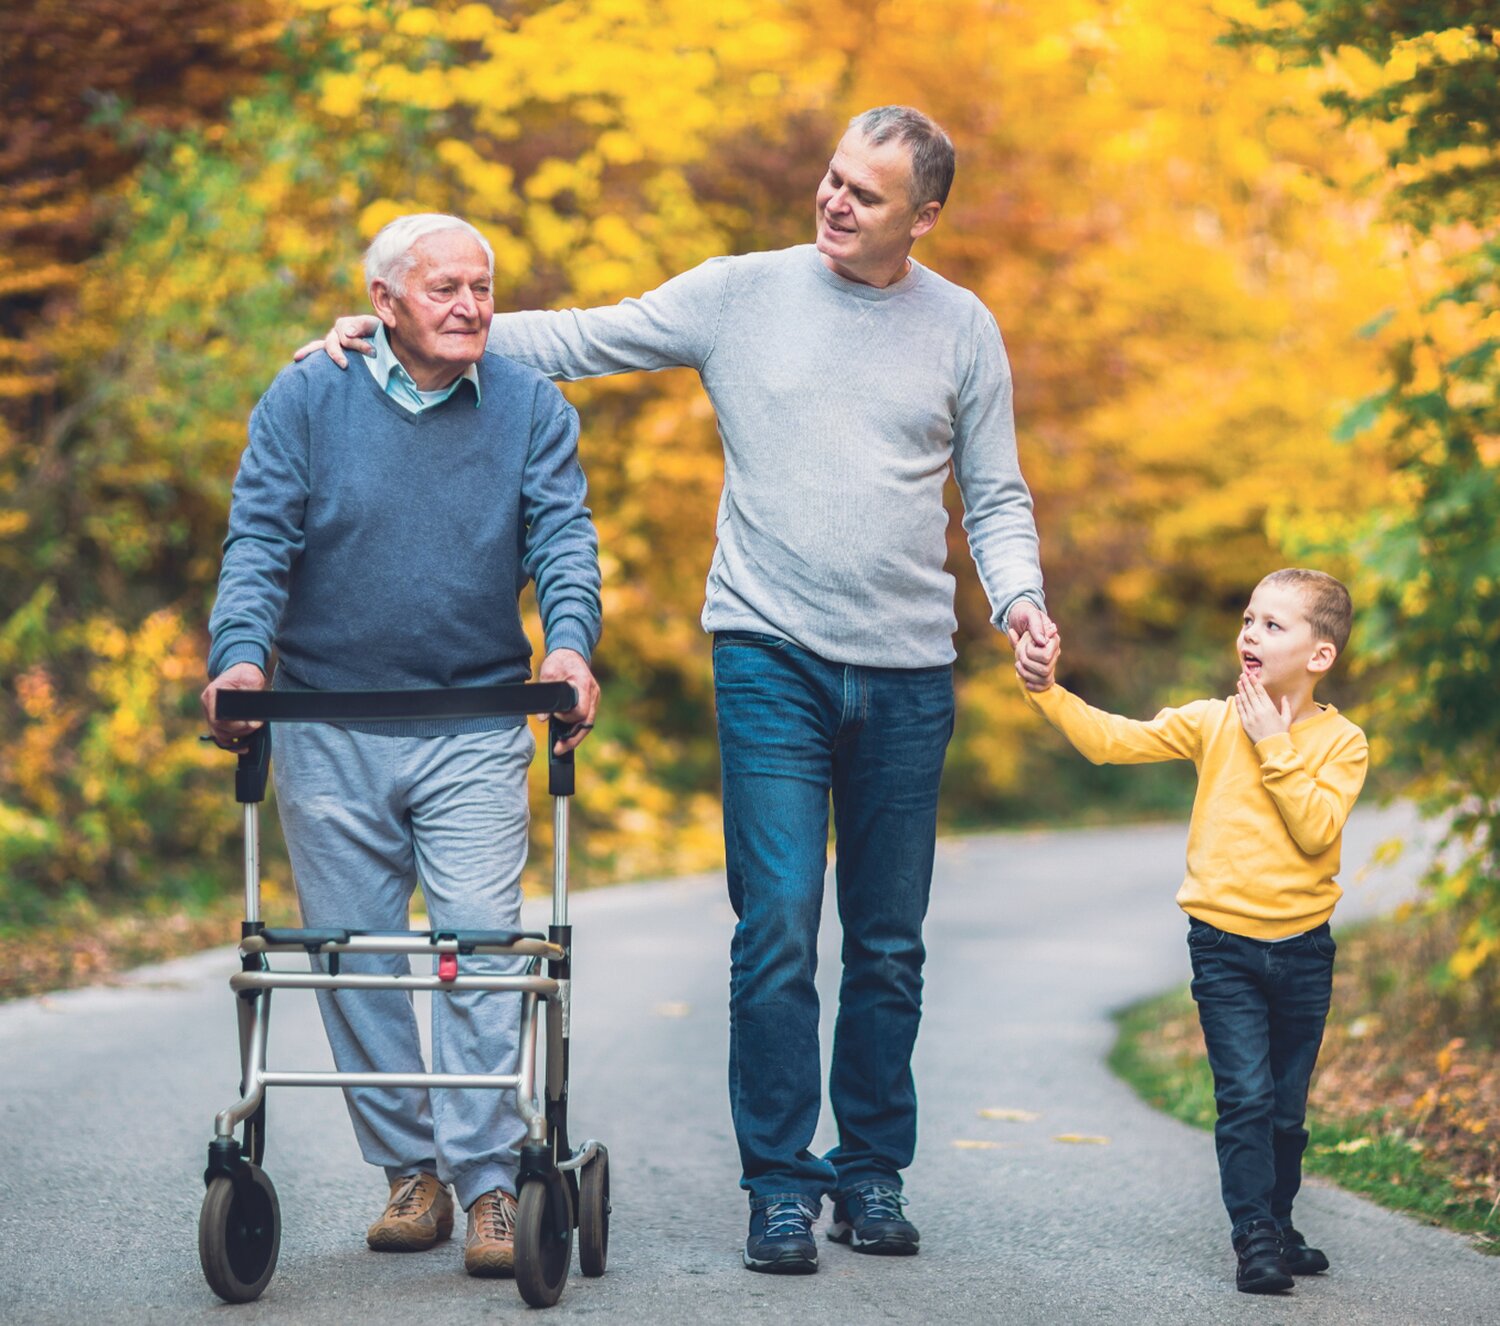 It’s important for families affected by COPD to have a plan in place regarding care options. Having trusted tools and information can make getting the conversation started with healthcare providers easier.
PHOTO SOURCE: (c) Jovanmandic / iStock via Getty Images Plus